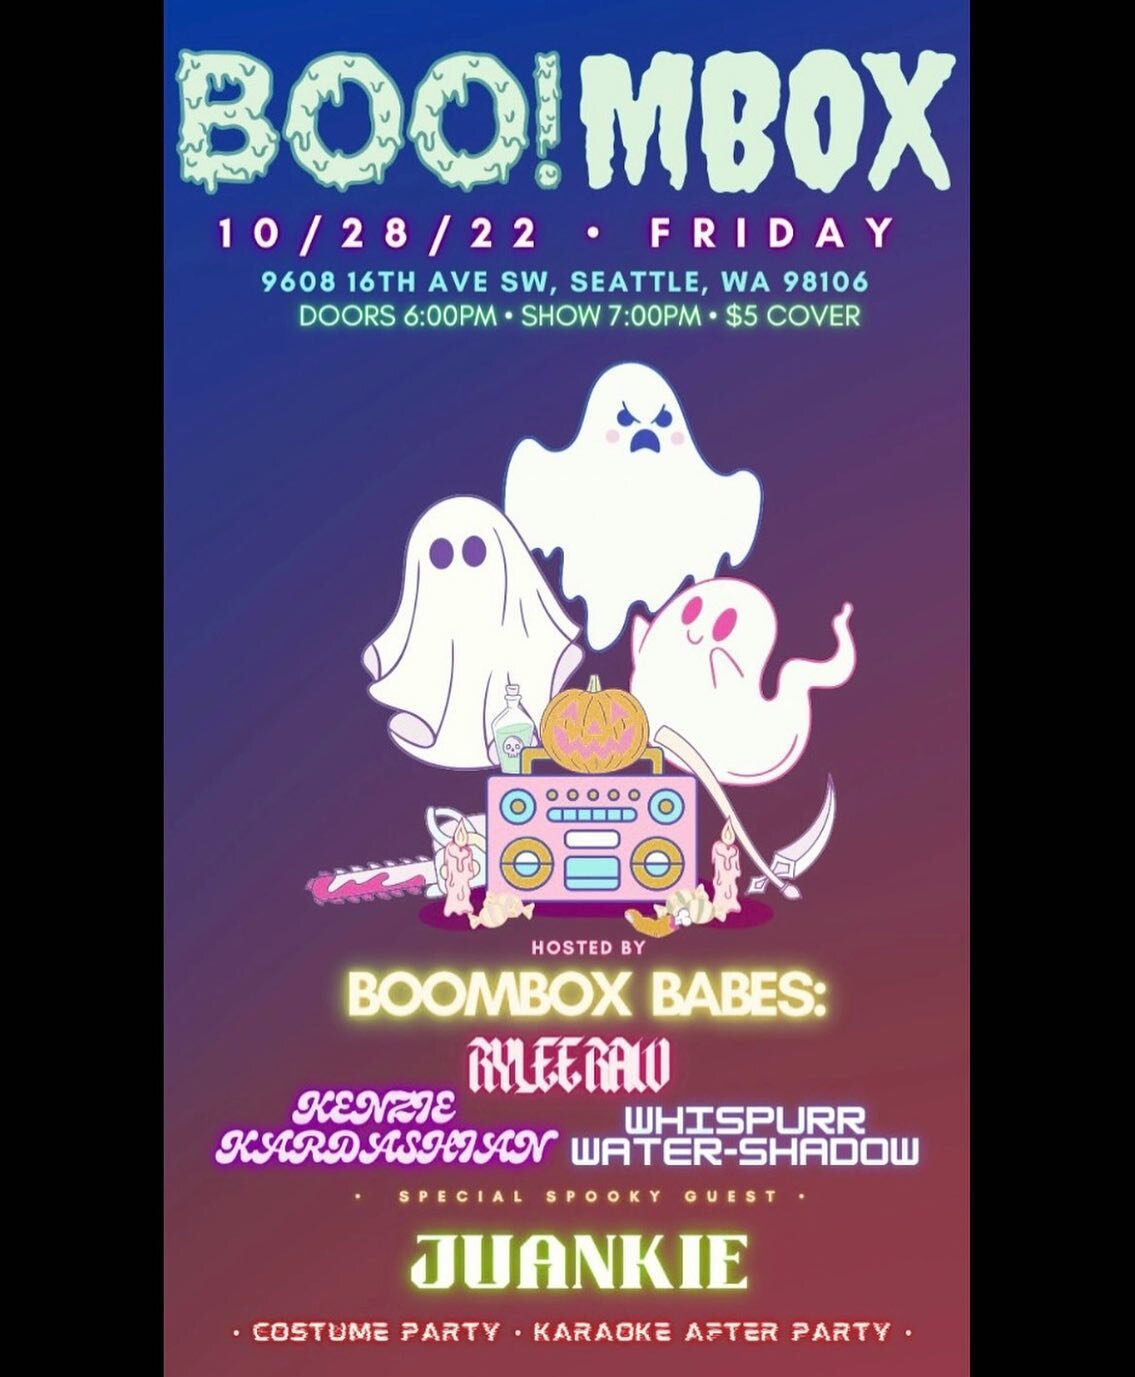 LESS THAN FIVE HOURS UNTIL THE BOOMBOX BABES SPOOKY OOKY HALLOWEEN SHOW!!! 
Doors at 6. Show at 7.
Costume party and costume karaoke to follow at 9 with MVF!!! 

Super fun drink specials all night like our boozy blood bags 🩸for $8. And like always t